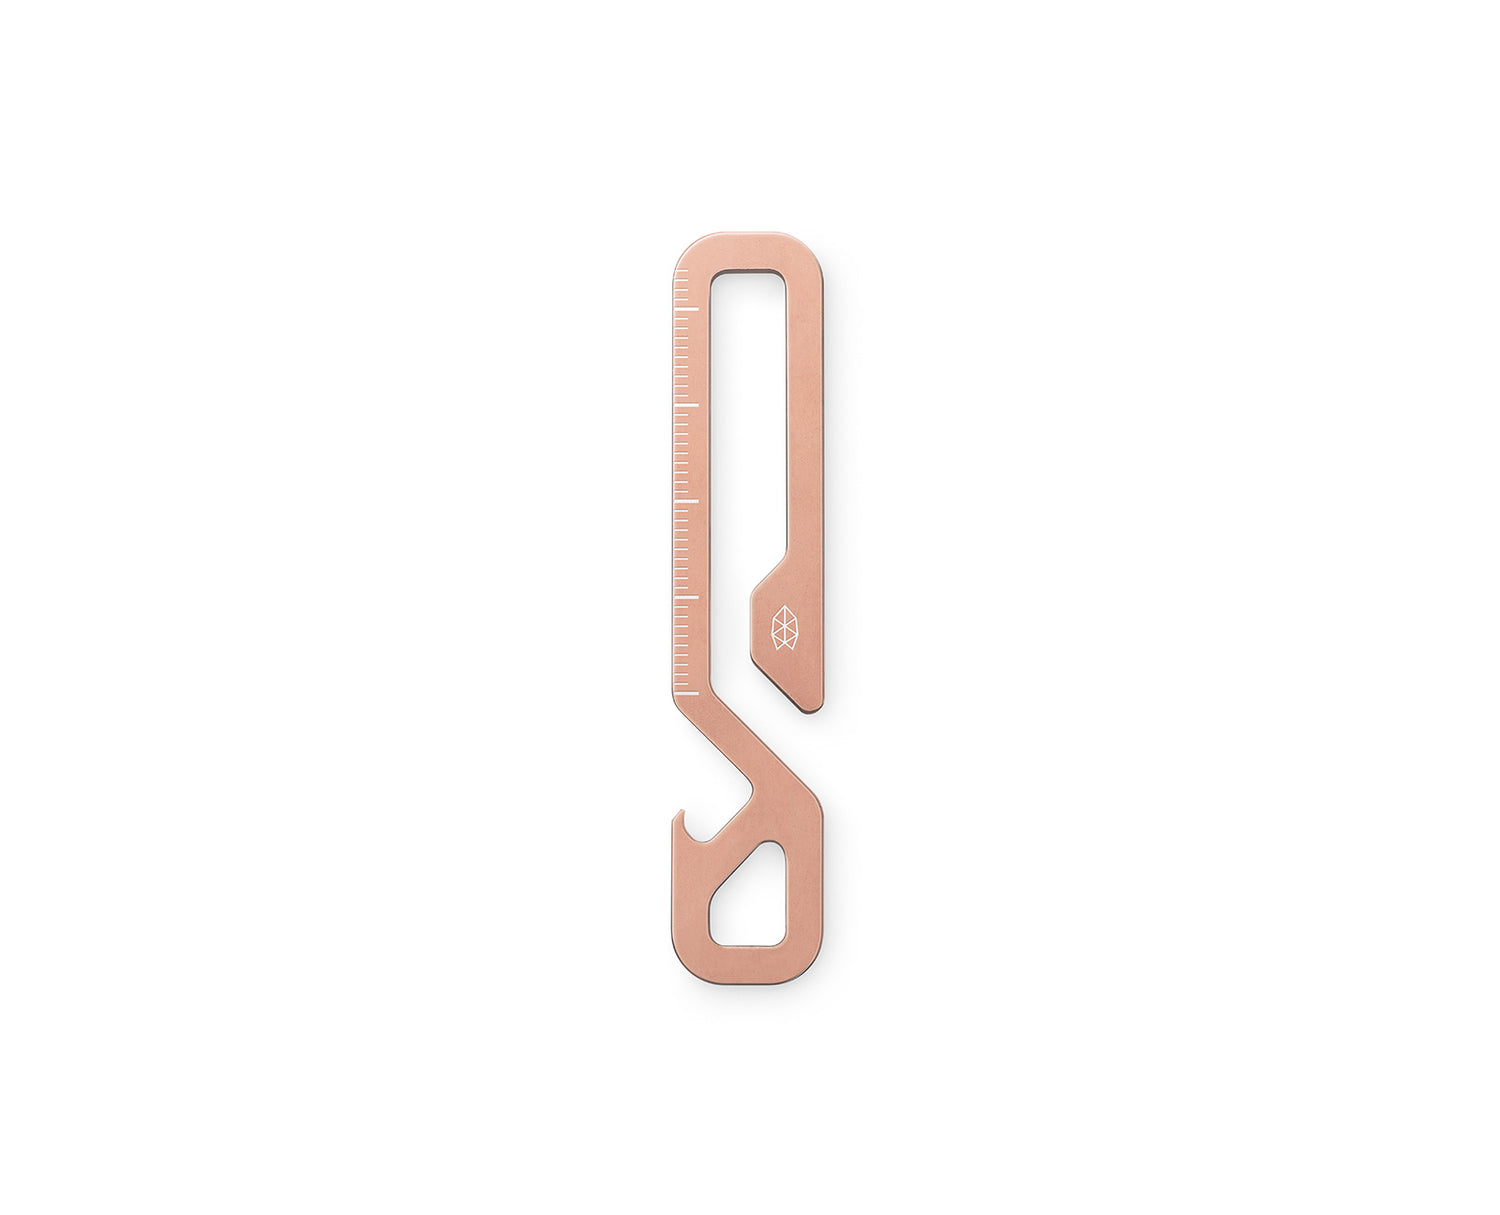 Rowan hook in rose gold and stainless.